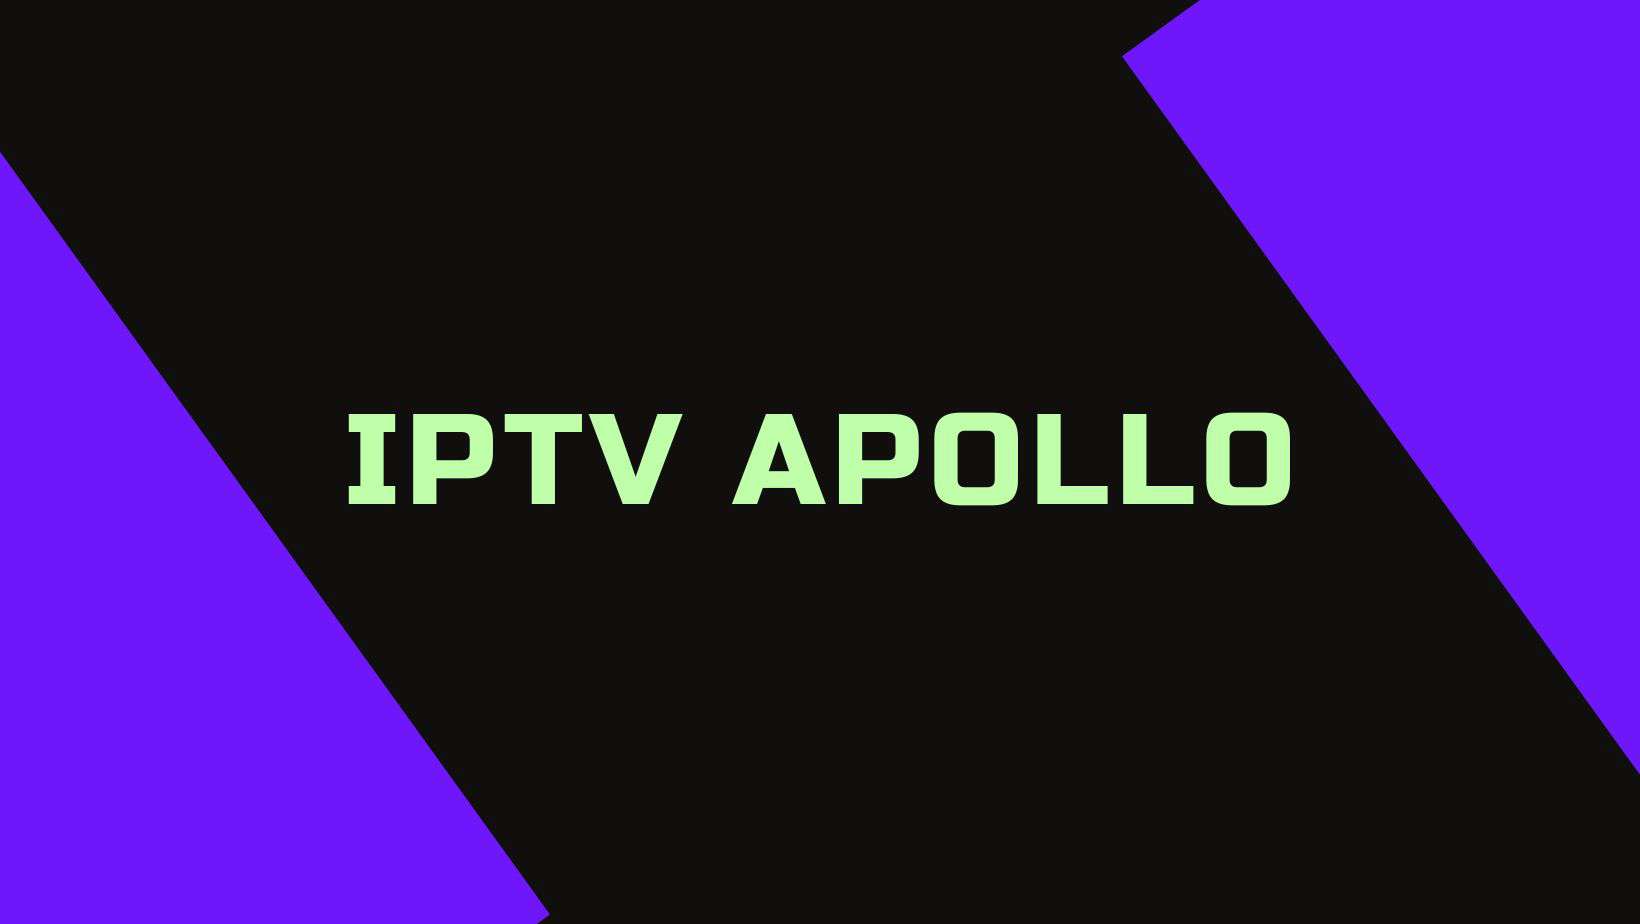 You are currently viewing iptv apollo